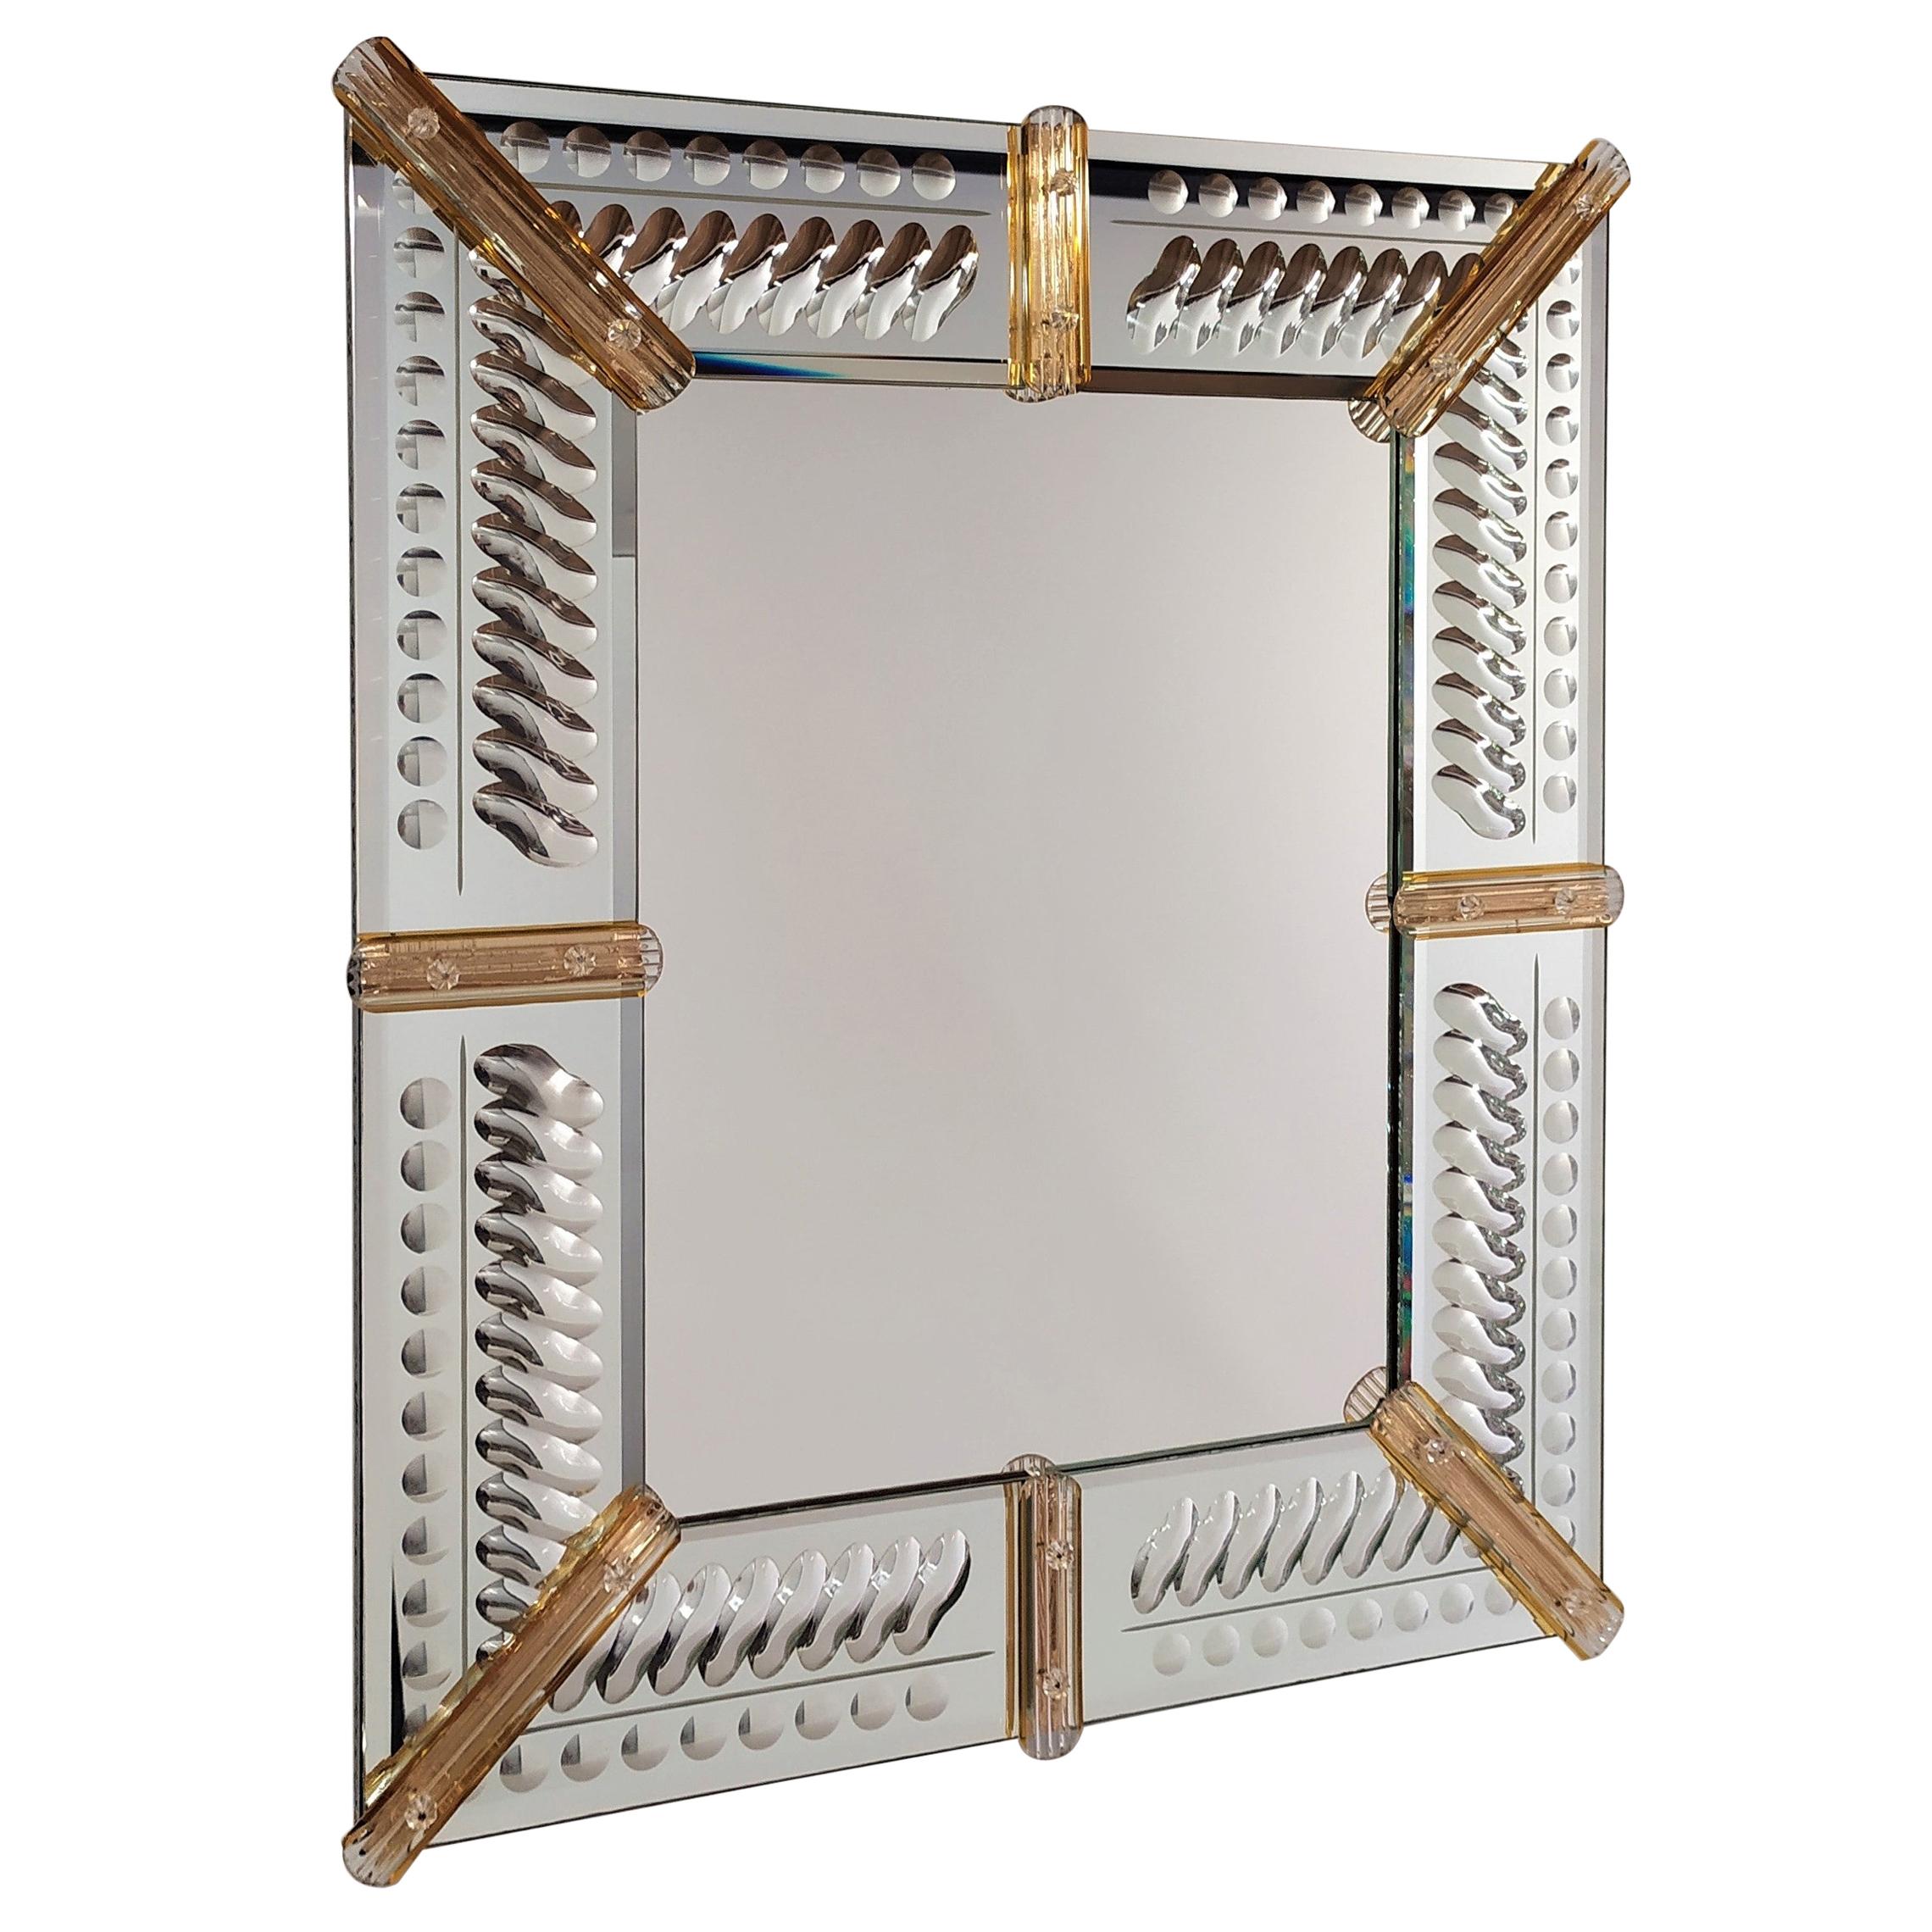 Contemporary Murano Glass Mirror, in Gold Glass by Fratelli Tosi Hand-Crafted